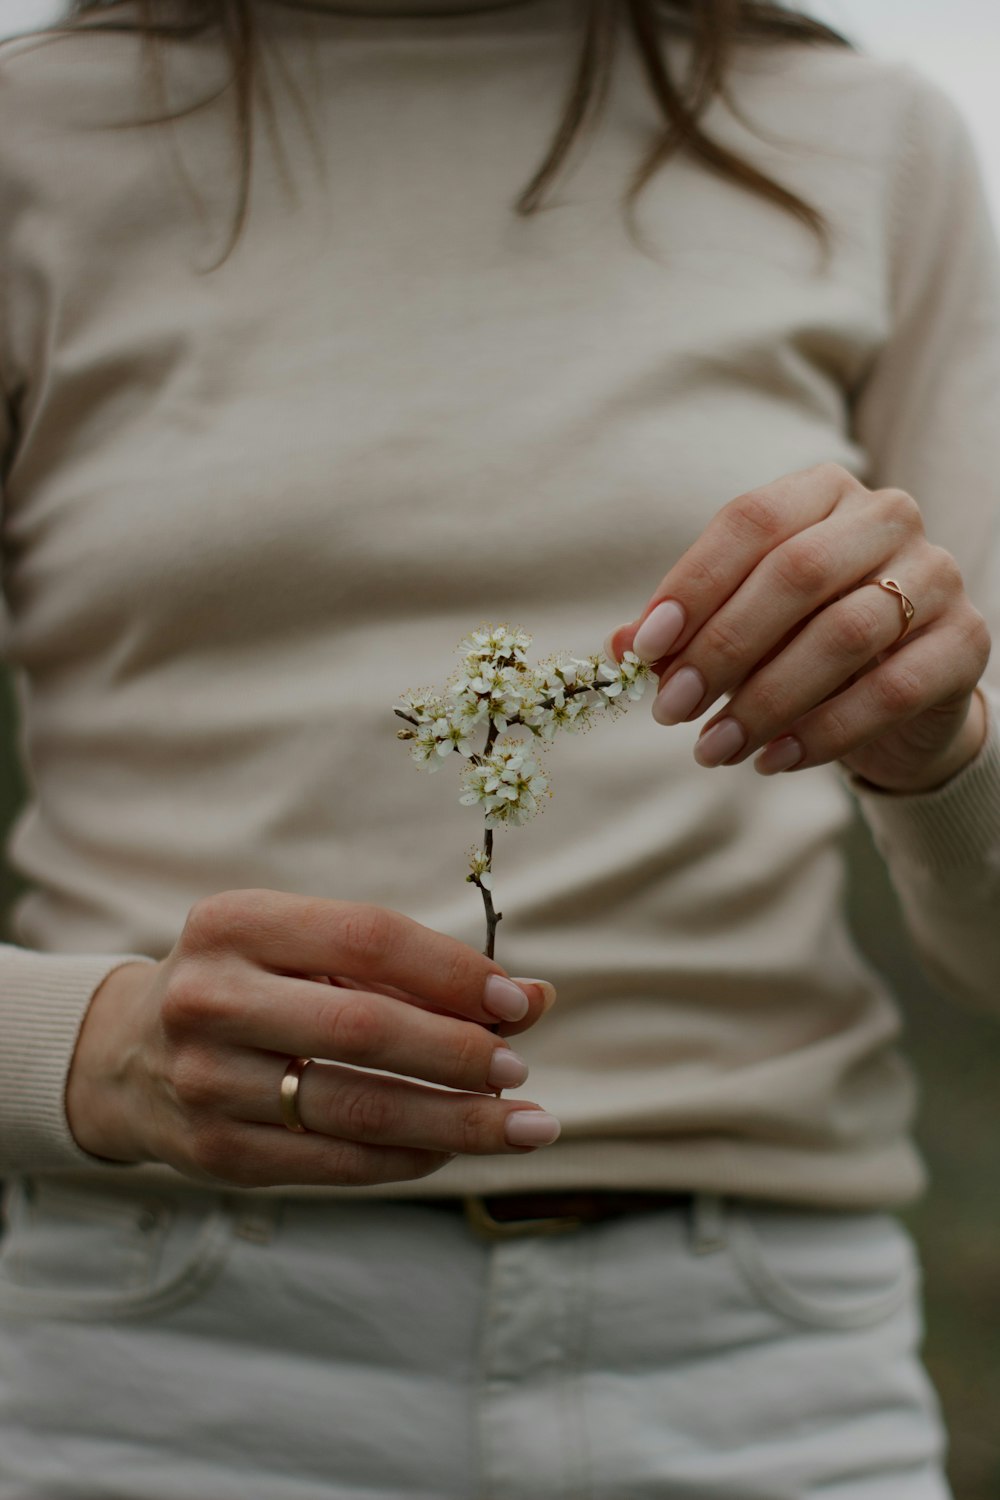 a woman holding a small white flower in her hands